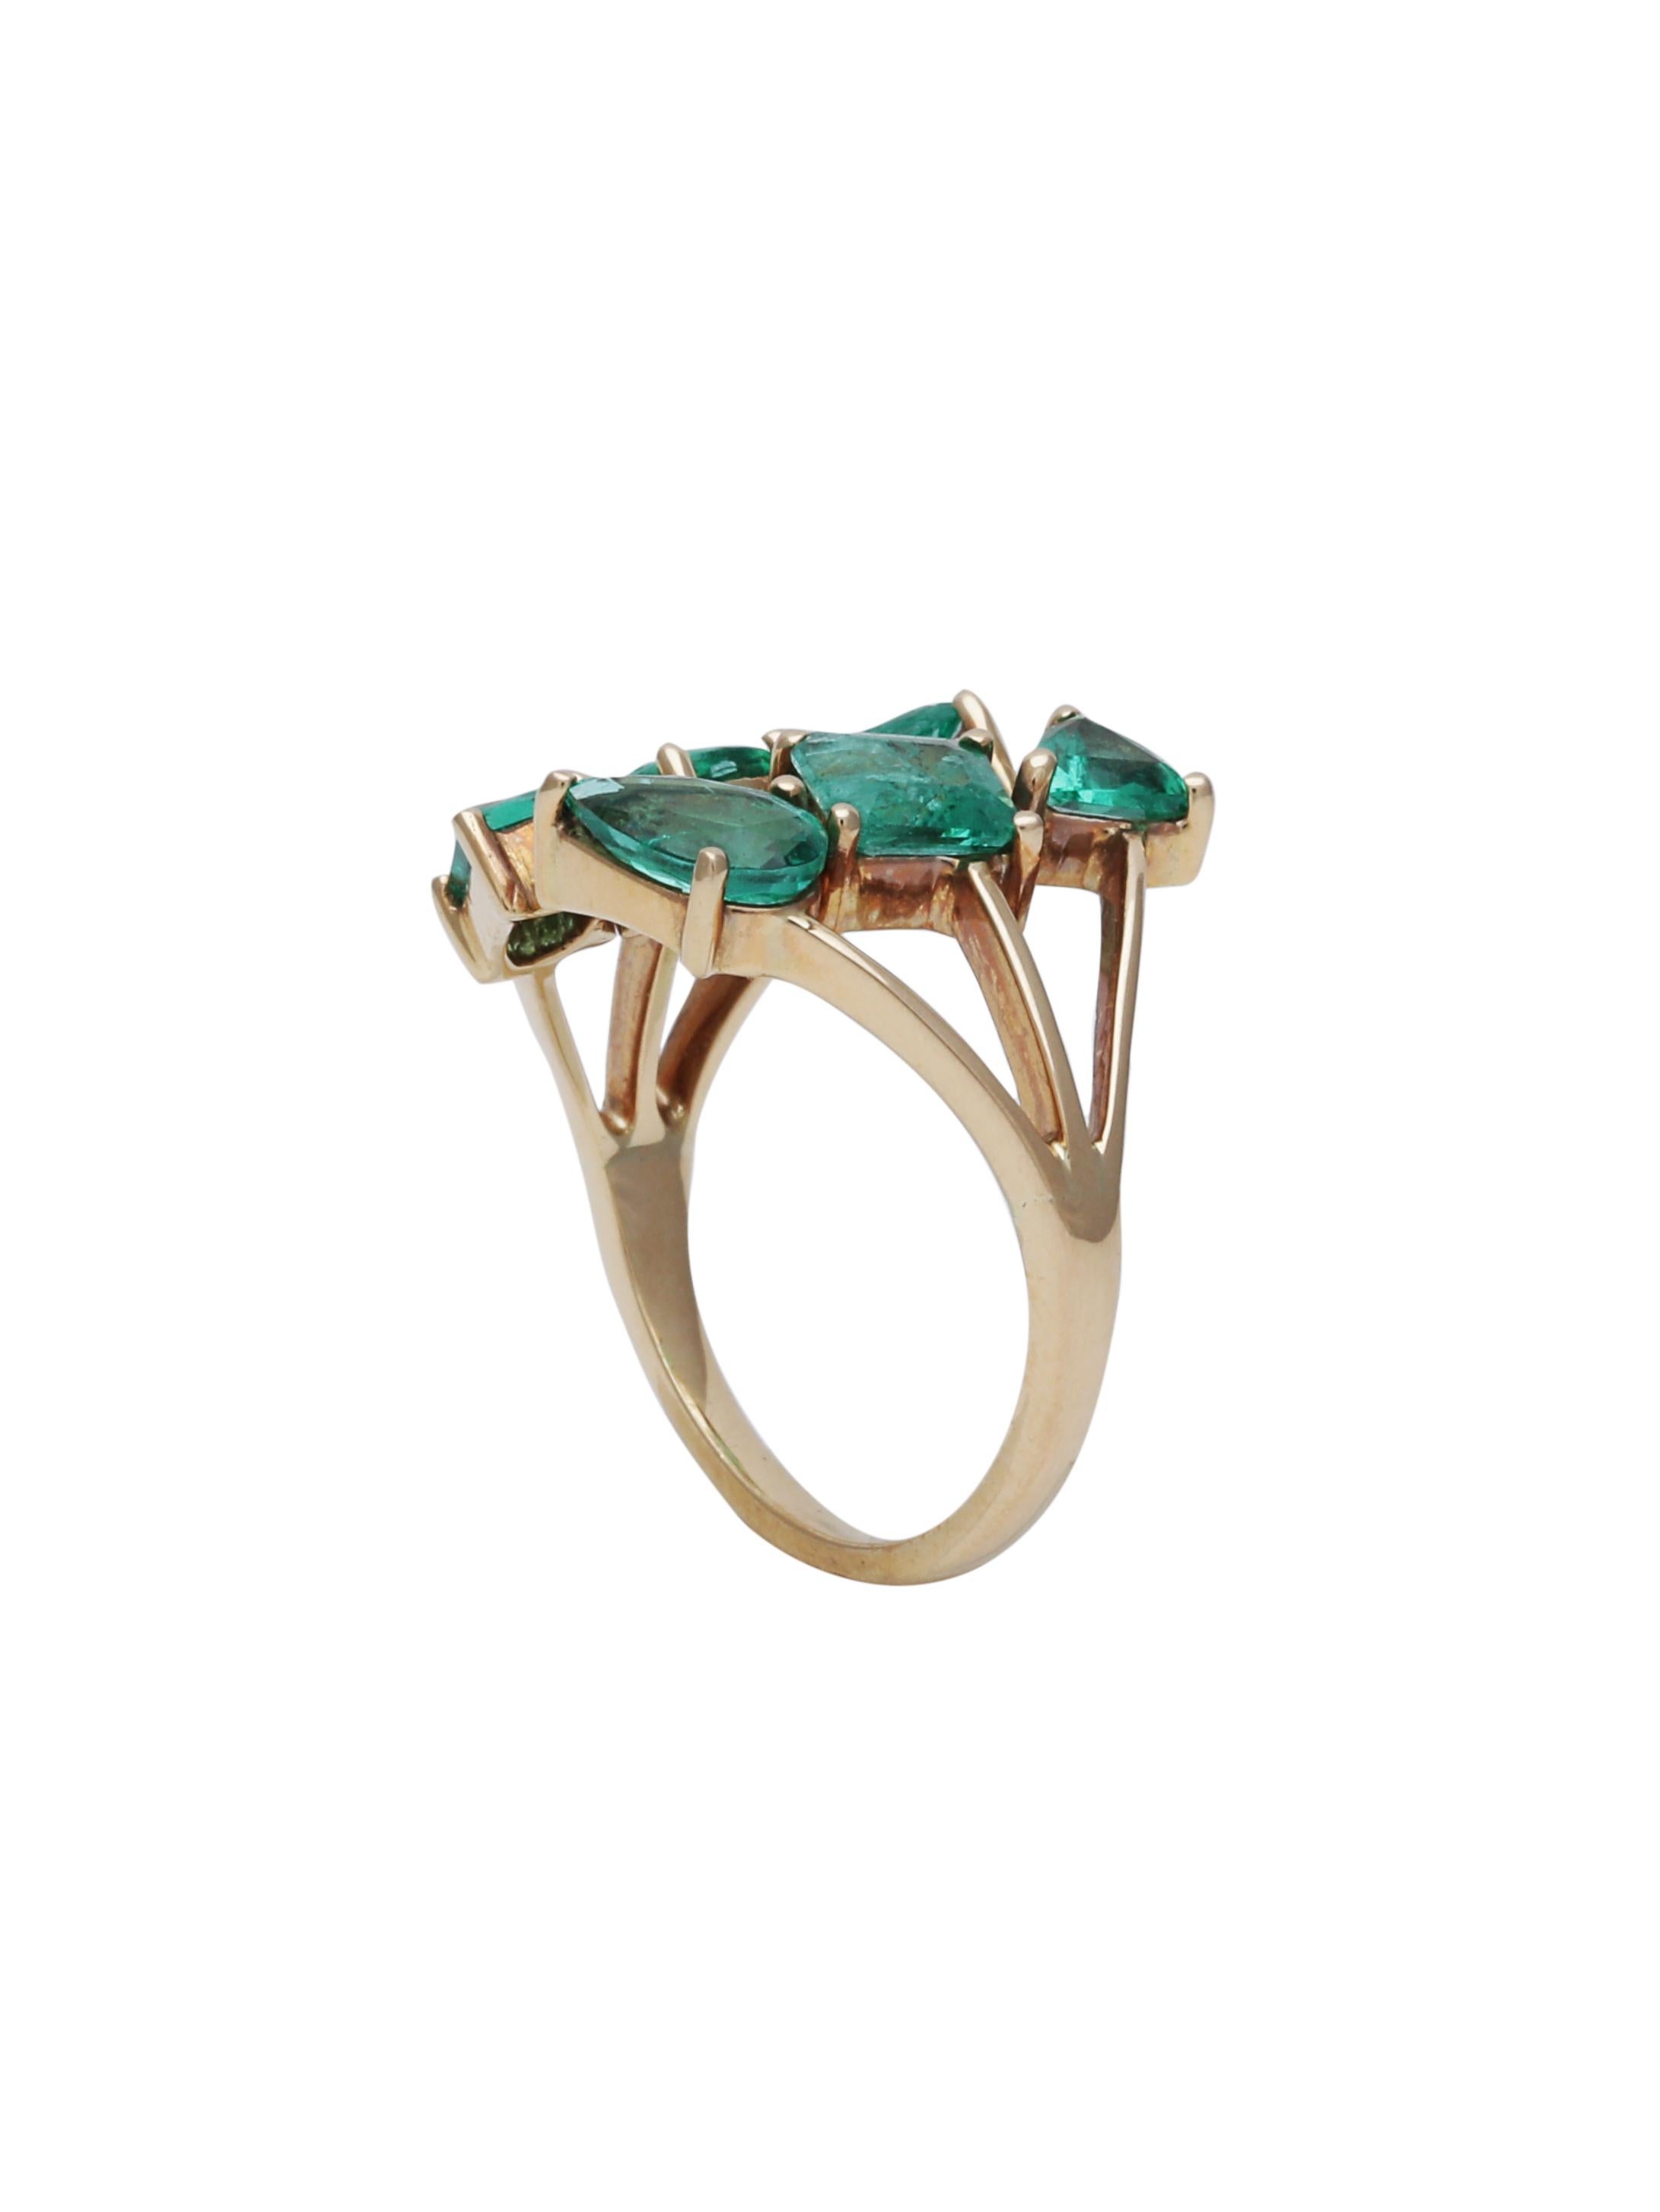 Contemporary Fancy 6-Stone Emerald Cocktail Ring Handcrafted in 18 Karat Yellow Gold  For Sale